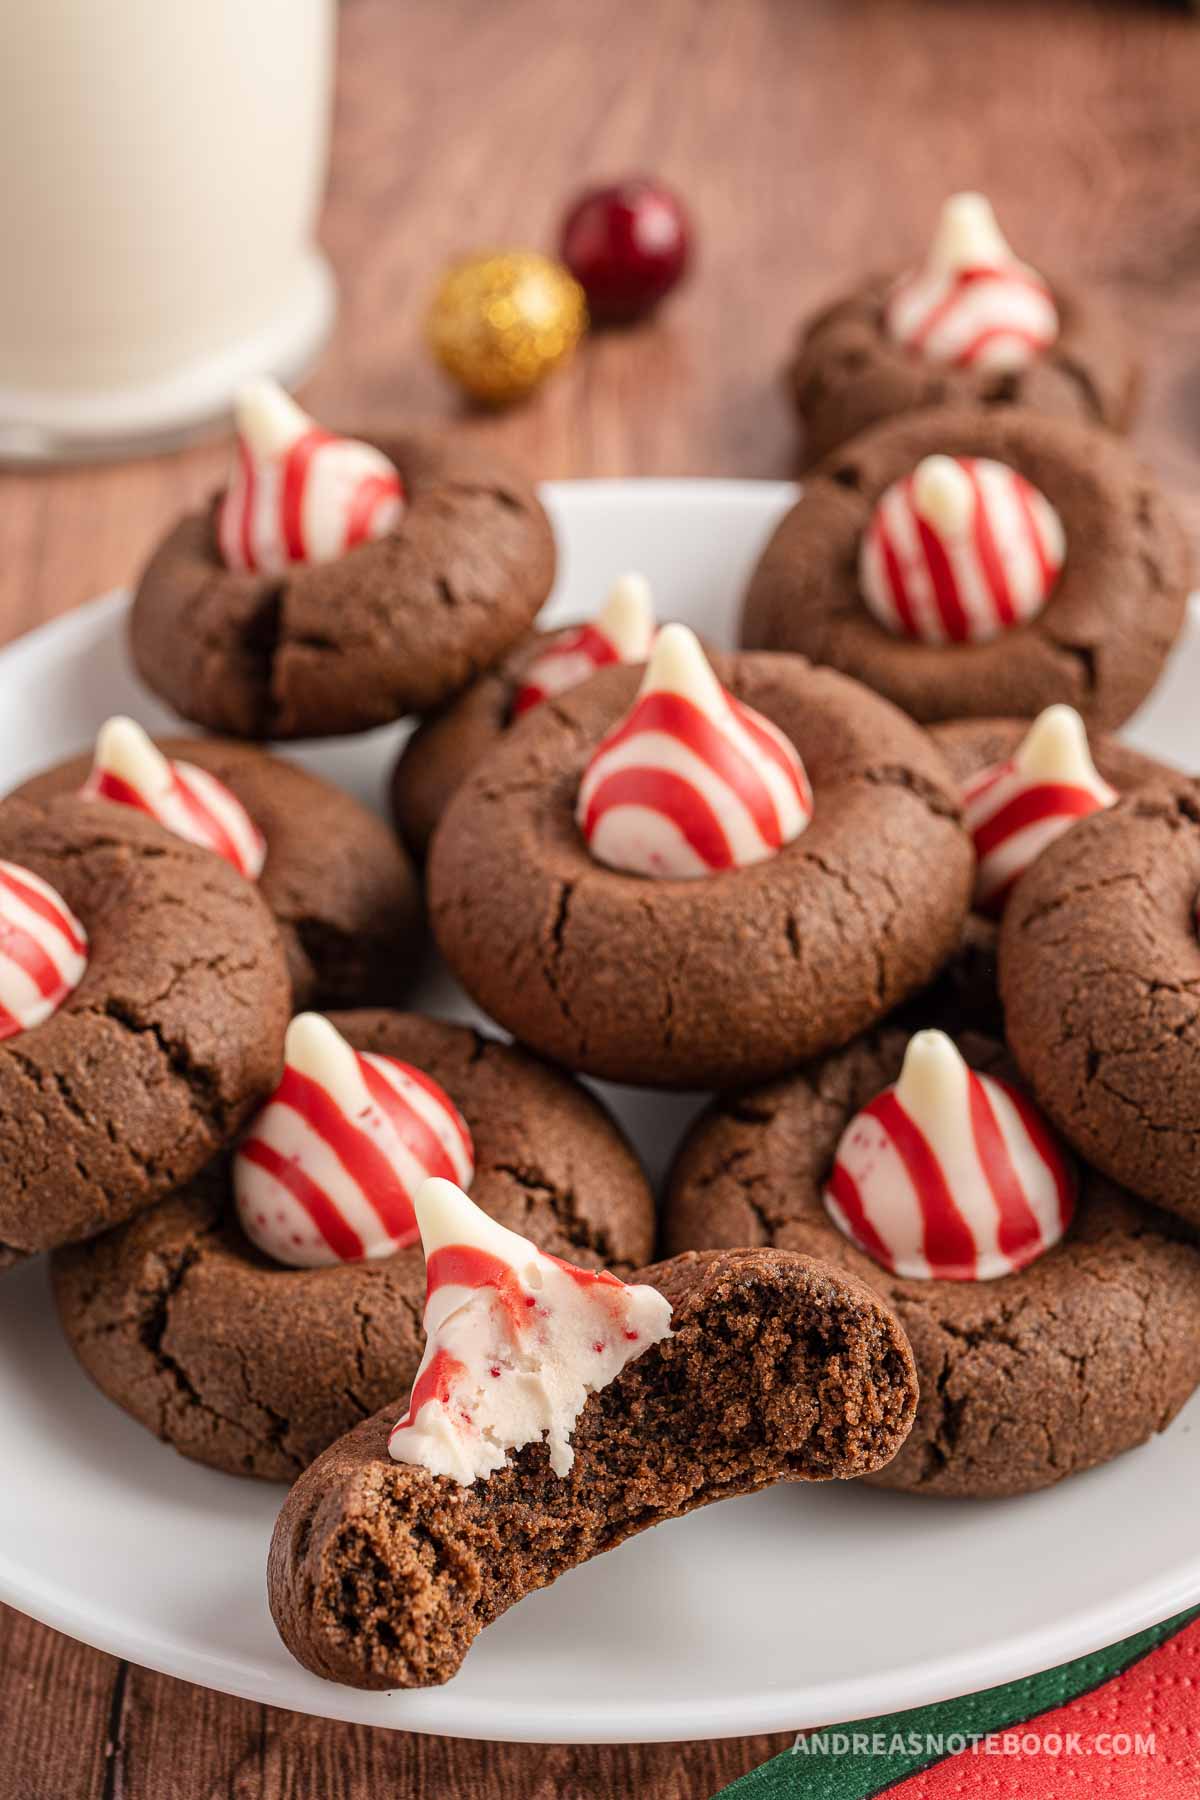 Pile of chocolate peppermint kiss blossom cookies.